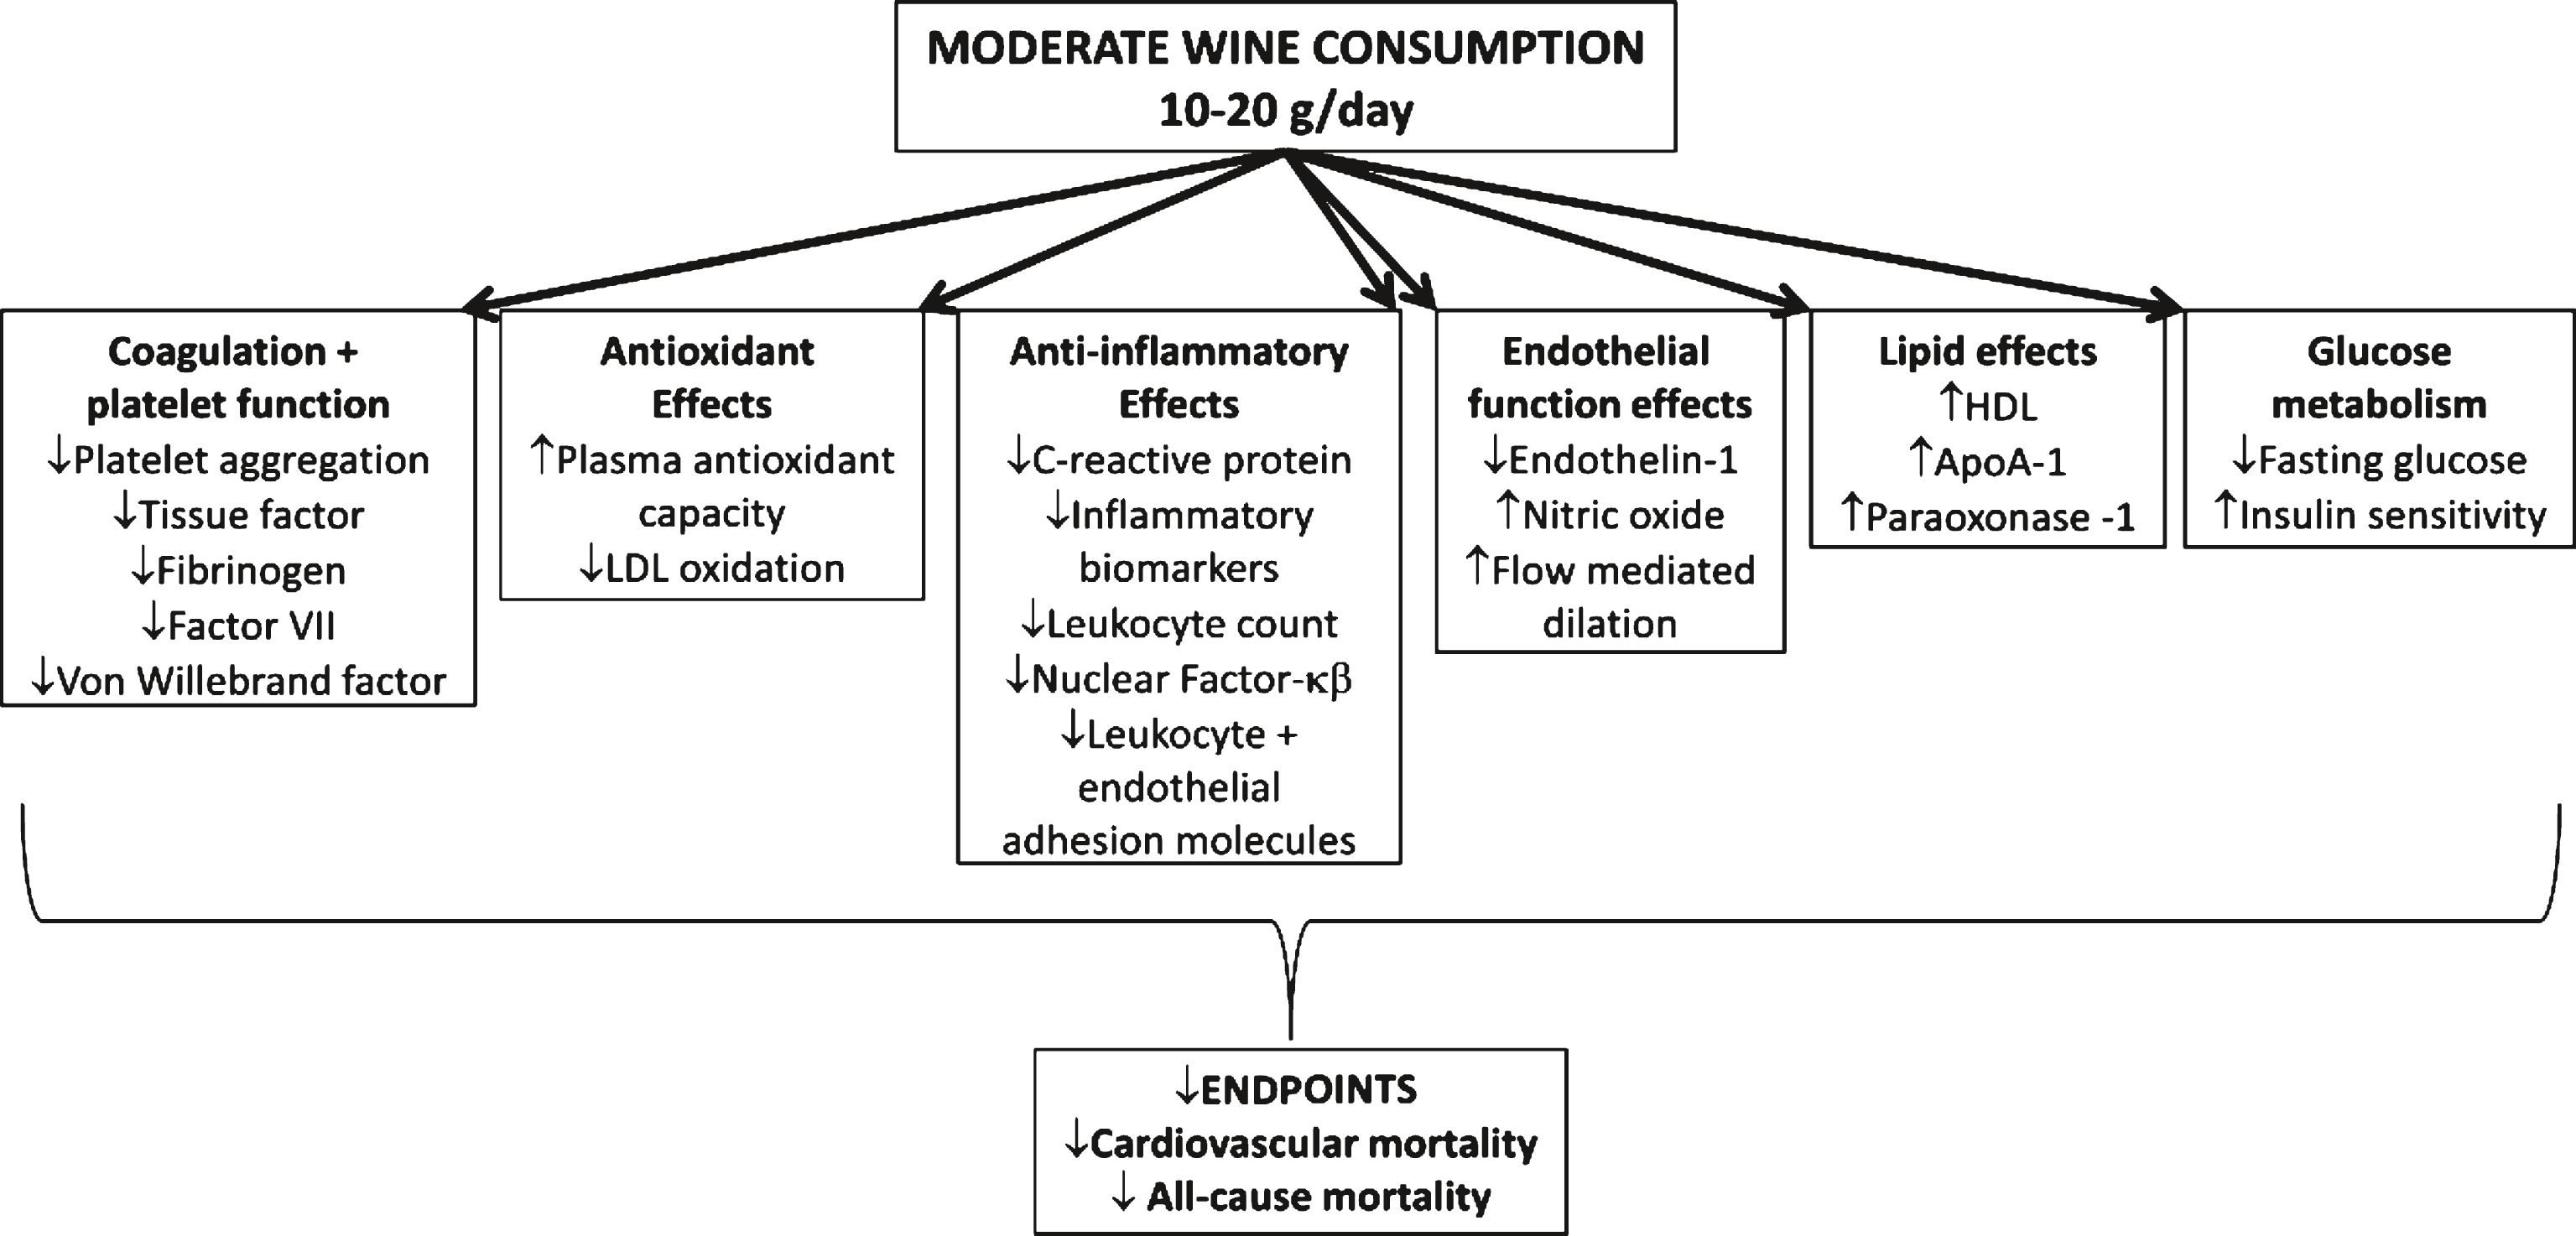 Cardiovascular effects of moderate red wine consumption. Apo A-1: Apolipoprotein-1; CRP: C-reactive protein; FMD: flow-mediated dilation; HDL: high-density lipoprotein; LDL: low-density lipoprotein; MDA: malon-dialdehyde; NF-κB: nuclear factor-κB; NO: nitric oxide; SOD: superoxide dismutase (adapted from Chiva-Blanch et al. 2013) [174].